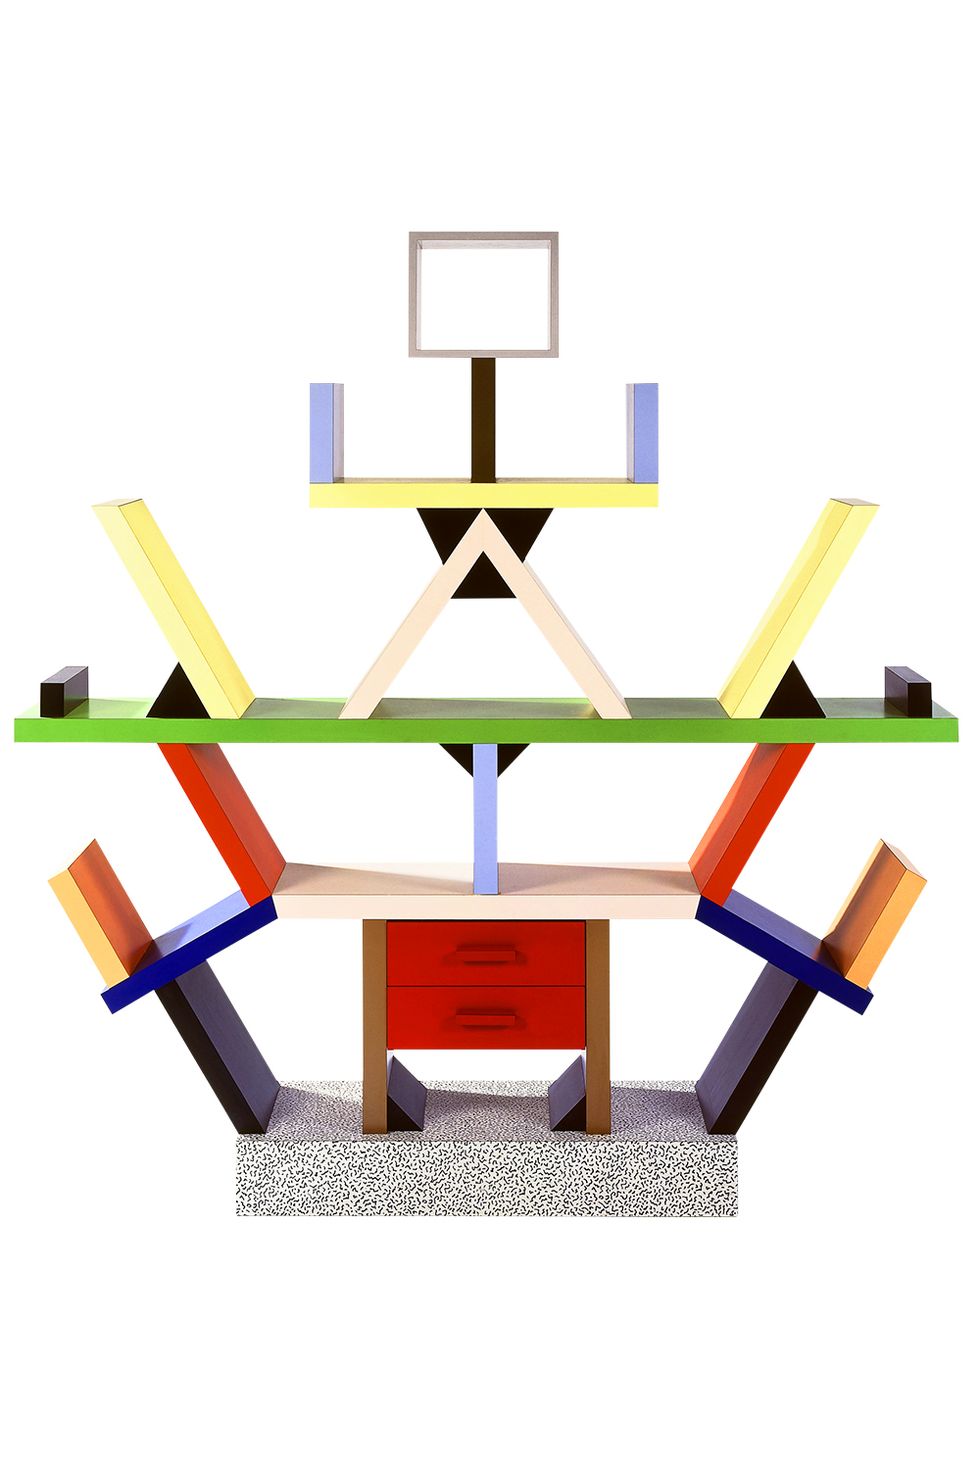 <p>"The architect and designer Ettore Sottsass, for his shapes, colors, and modernity."</p><p><em data-redactor-tag="em" data-verified="redactor">—Evelyne</em></p><p><span class="redactor-invisible-space" data-verified="redactor" data-redactor-tag="span" data-redactor-class="redactor-invisible-space"></span></p>